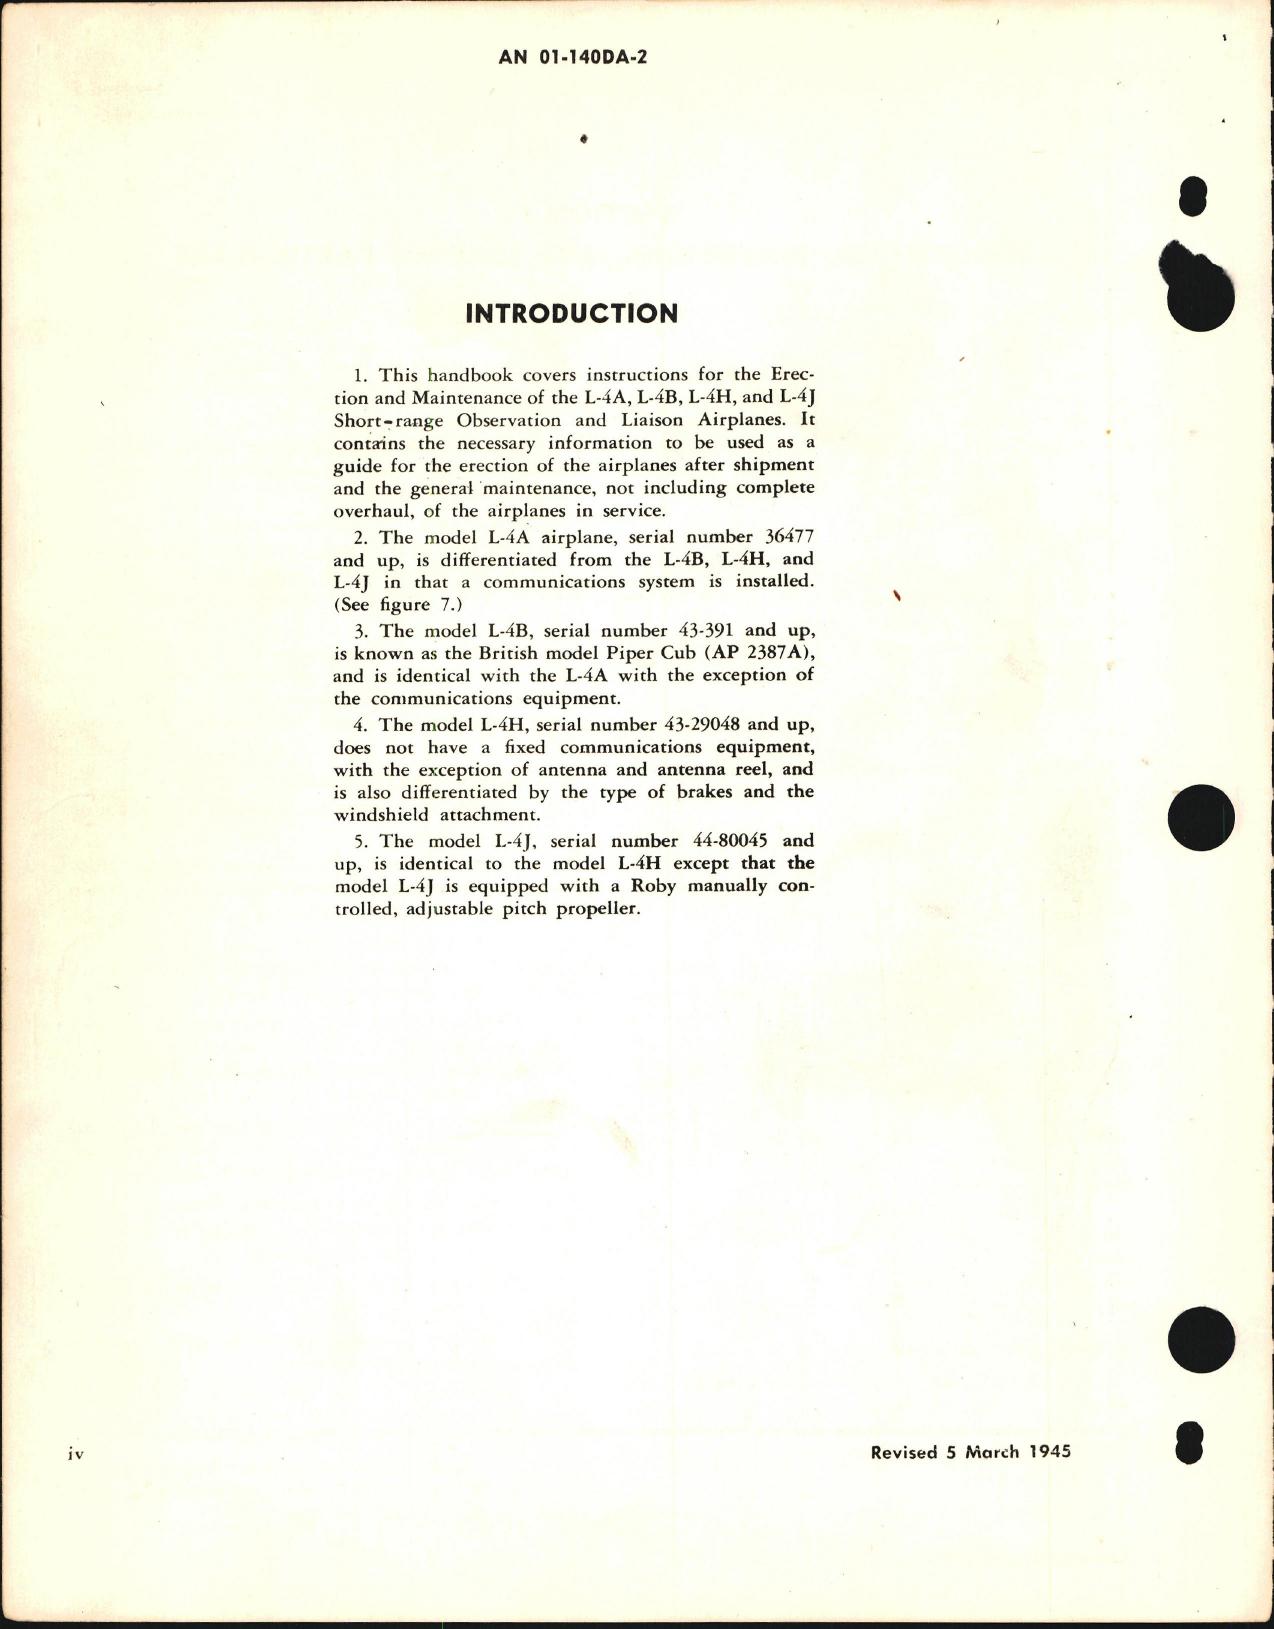 Sample page 6 from AirCorps Library document: Erection and Maintenance Instructions for ZL-4A, -4B, L-4H, and -4J